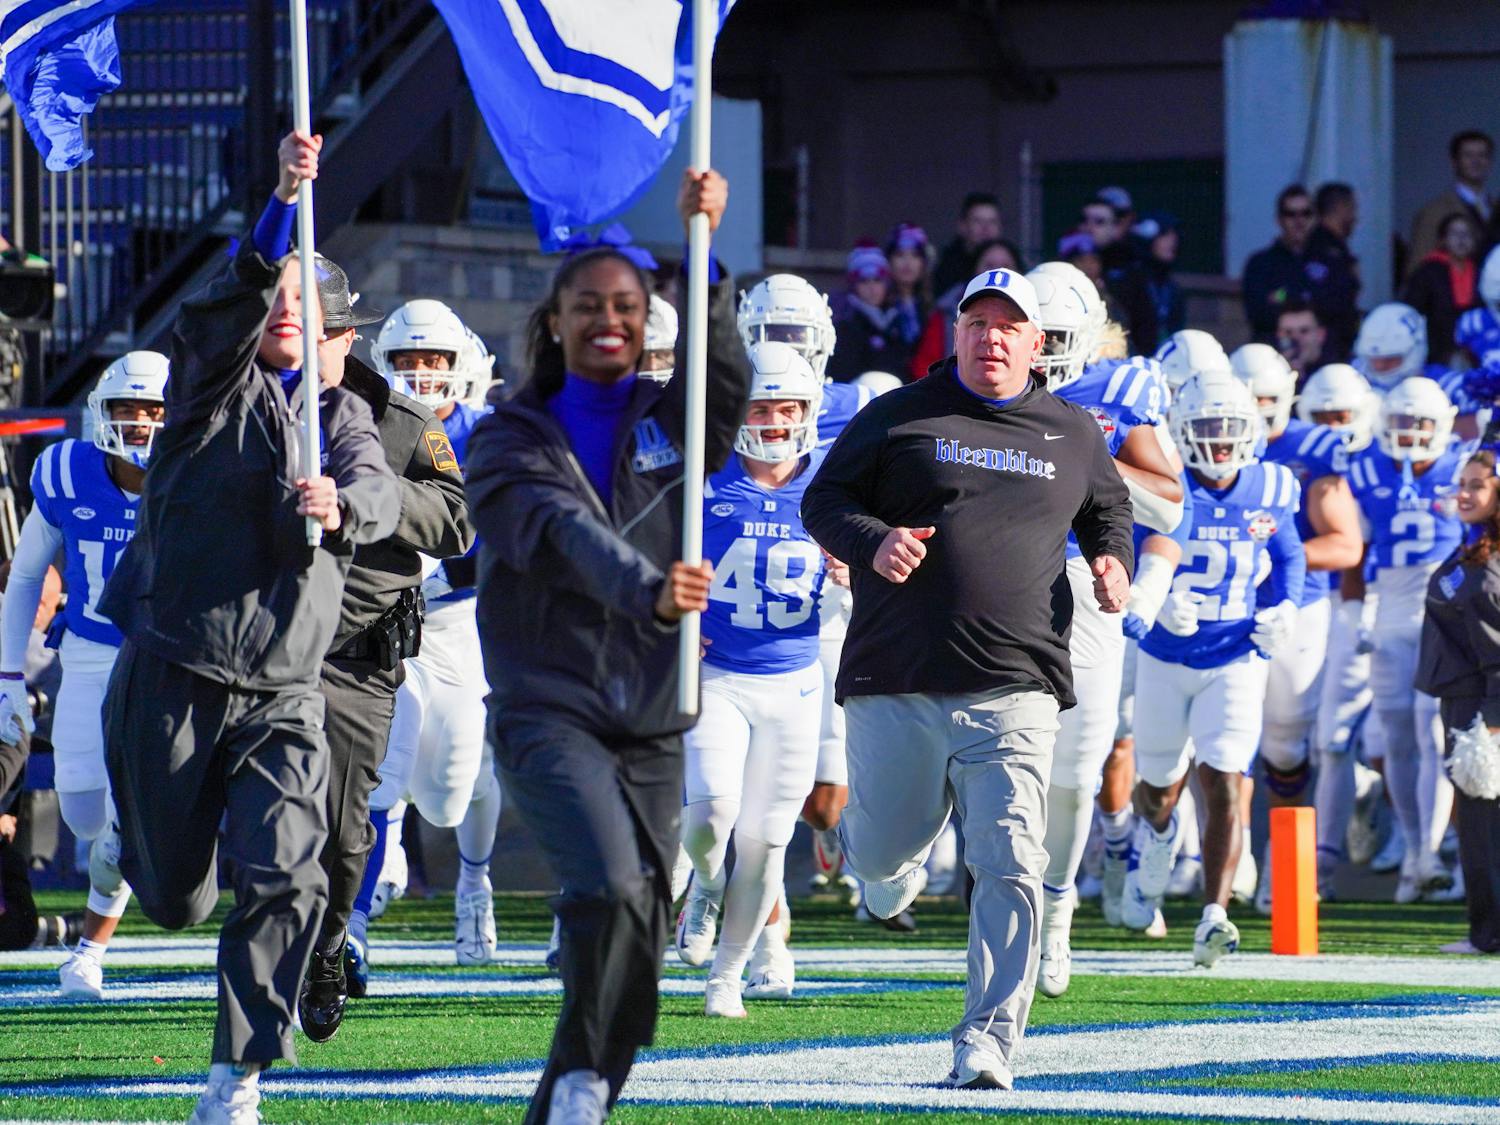 Head coach Mike Elko runs onto the field for one last time in 2022 before Duke's Military Bowl bout with UCF.